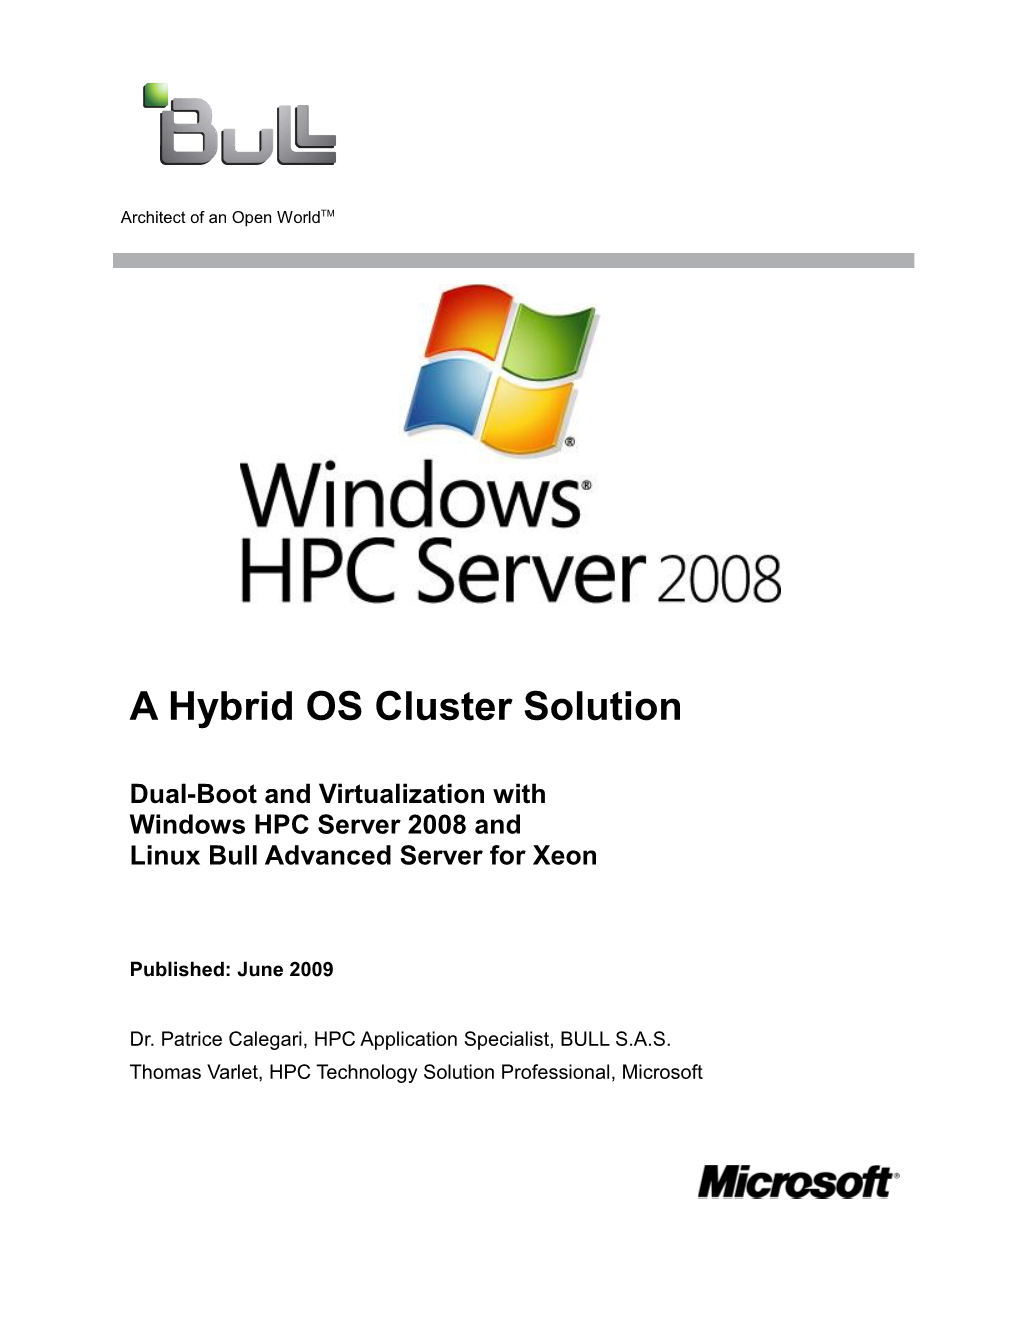 A Hybrid OS Cluster Solution: Dual-Boot And Virtualization With Windows HPC Server 2008 And Linux Bull Advanced Server For Xeon